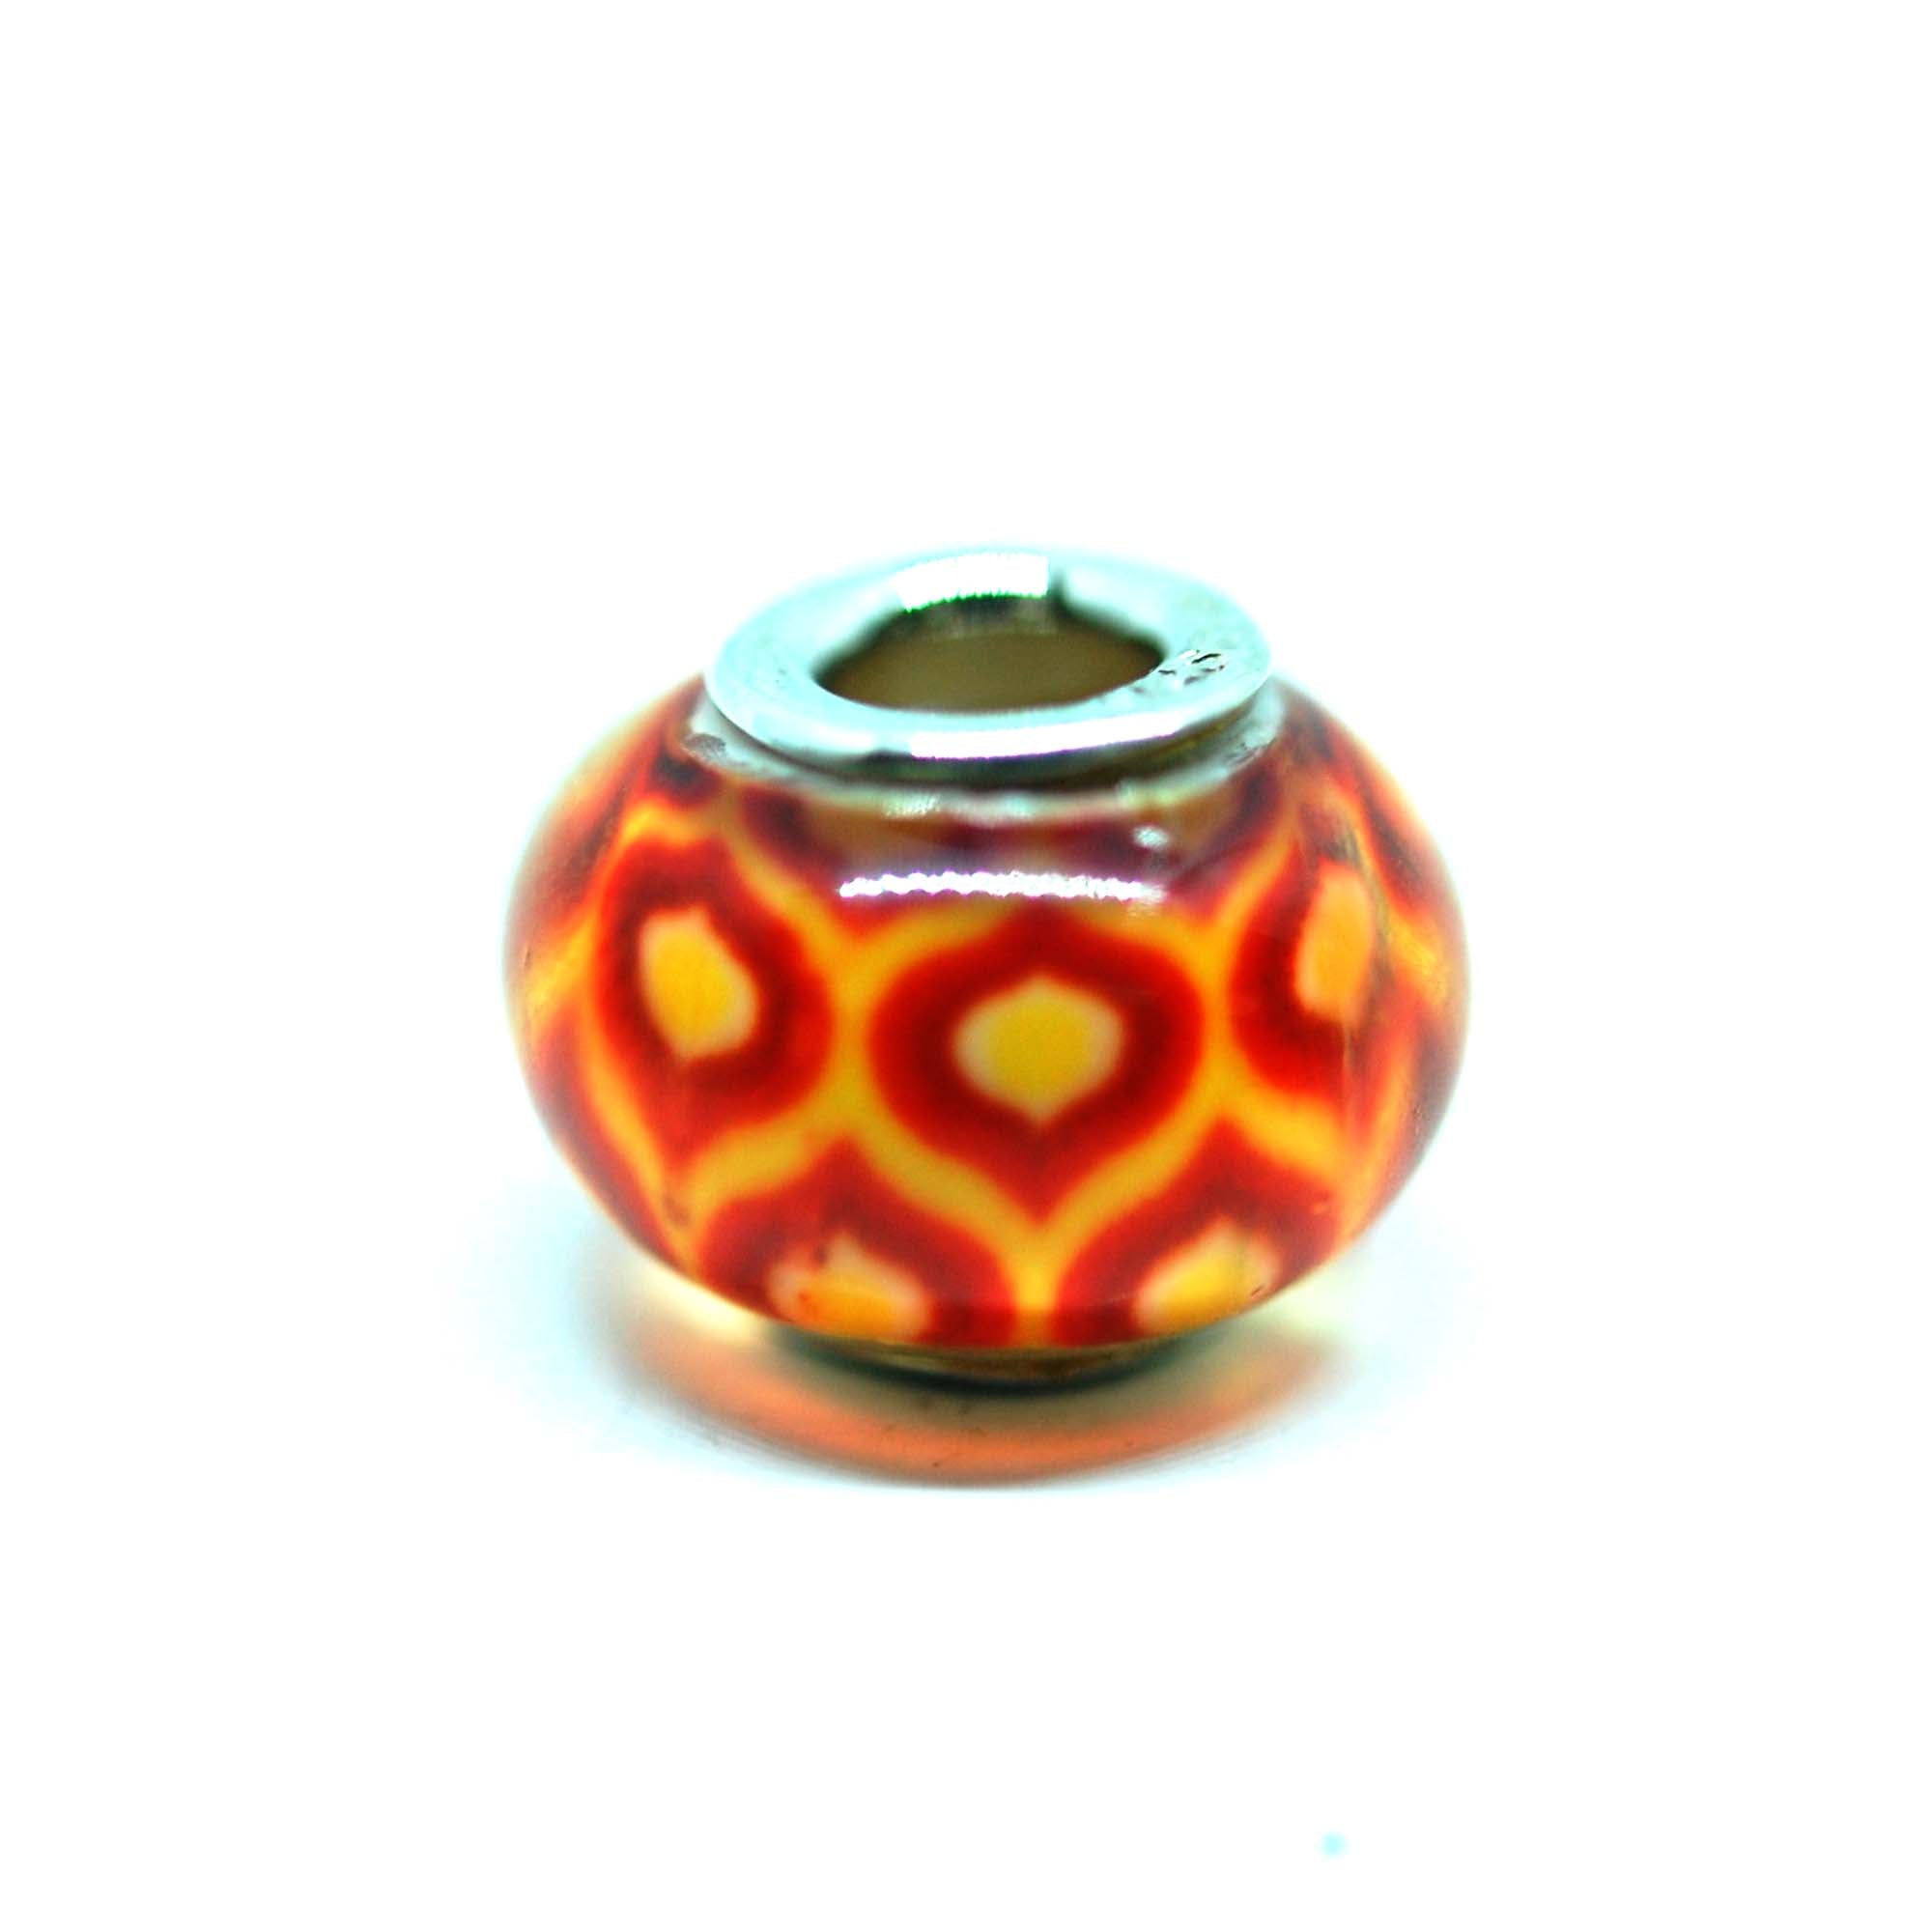 ESCM 4779: Emo P-Blet Murano Taking Charge Charm (Red)